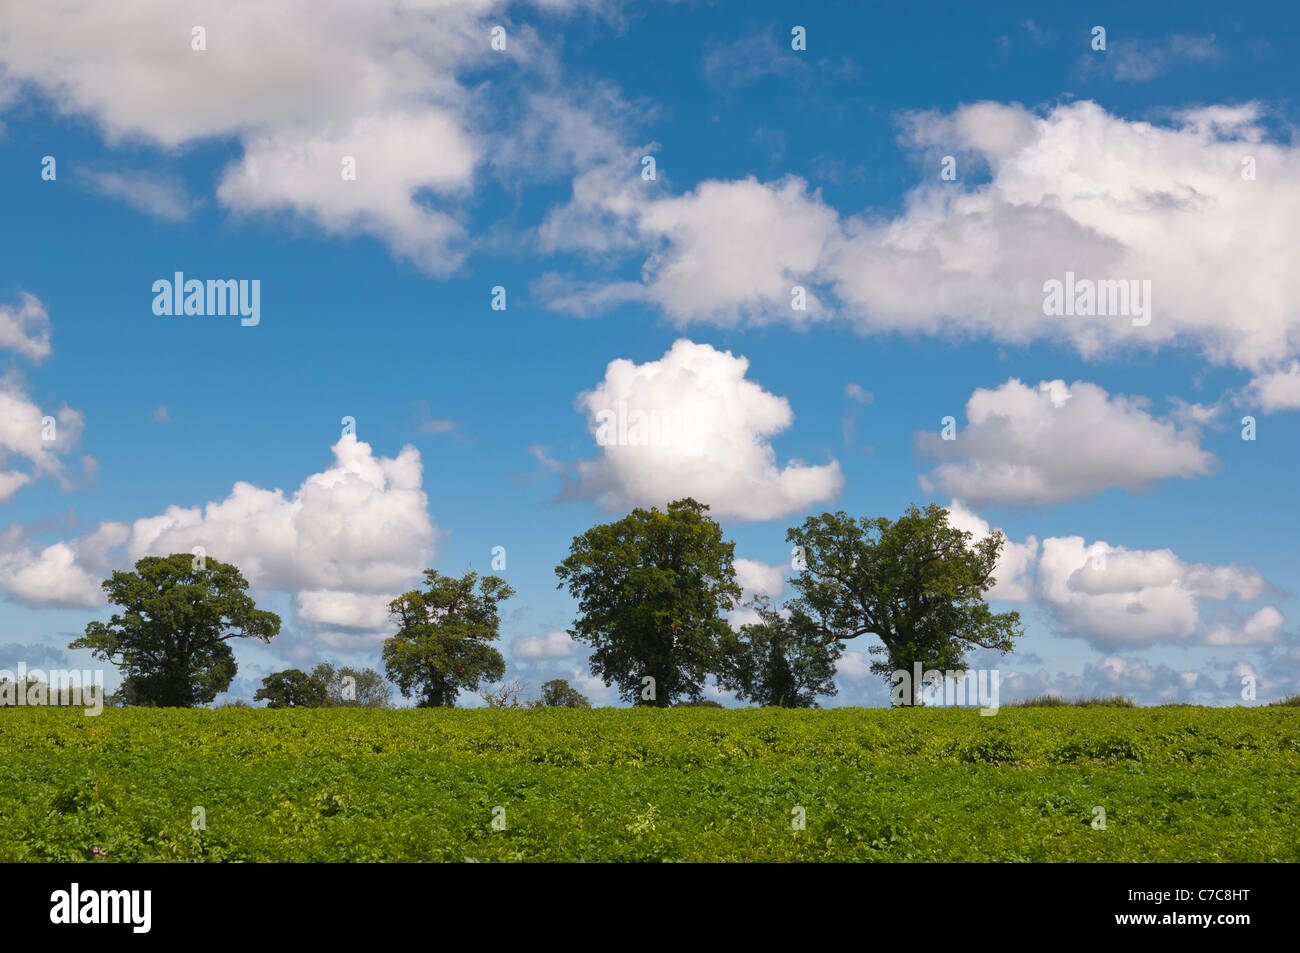 A row of oak trees in a Uk field on a summer day Stock Photo